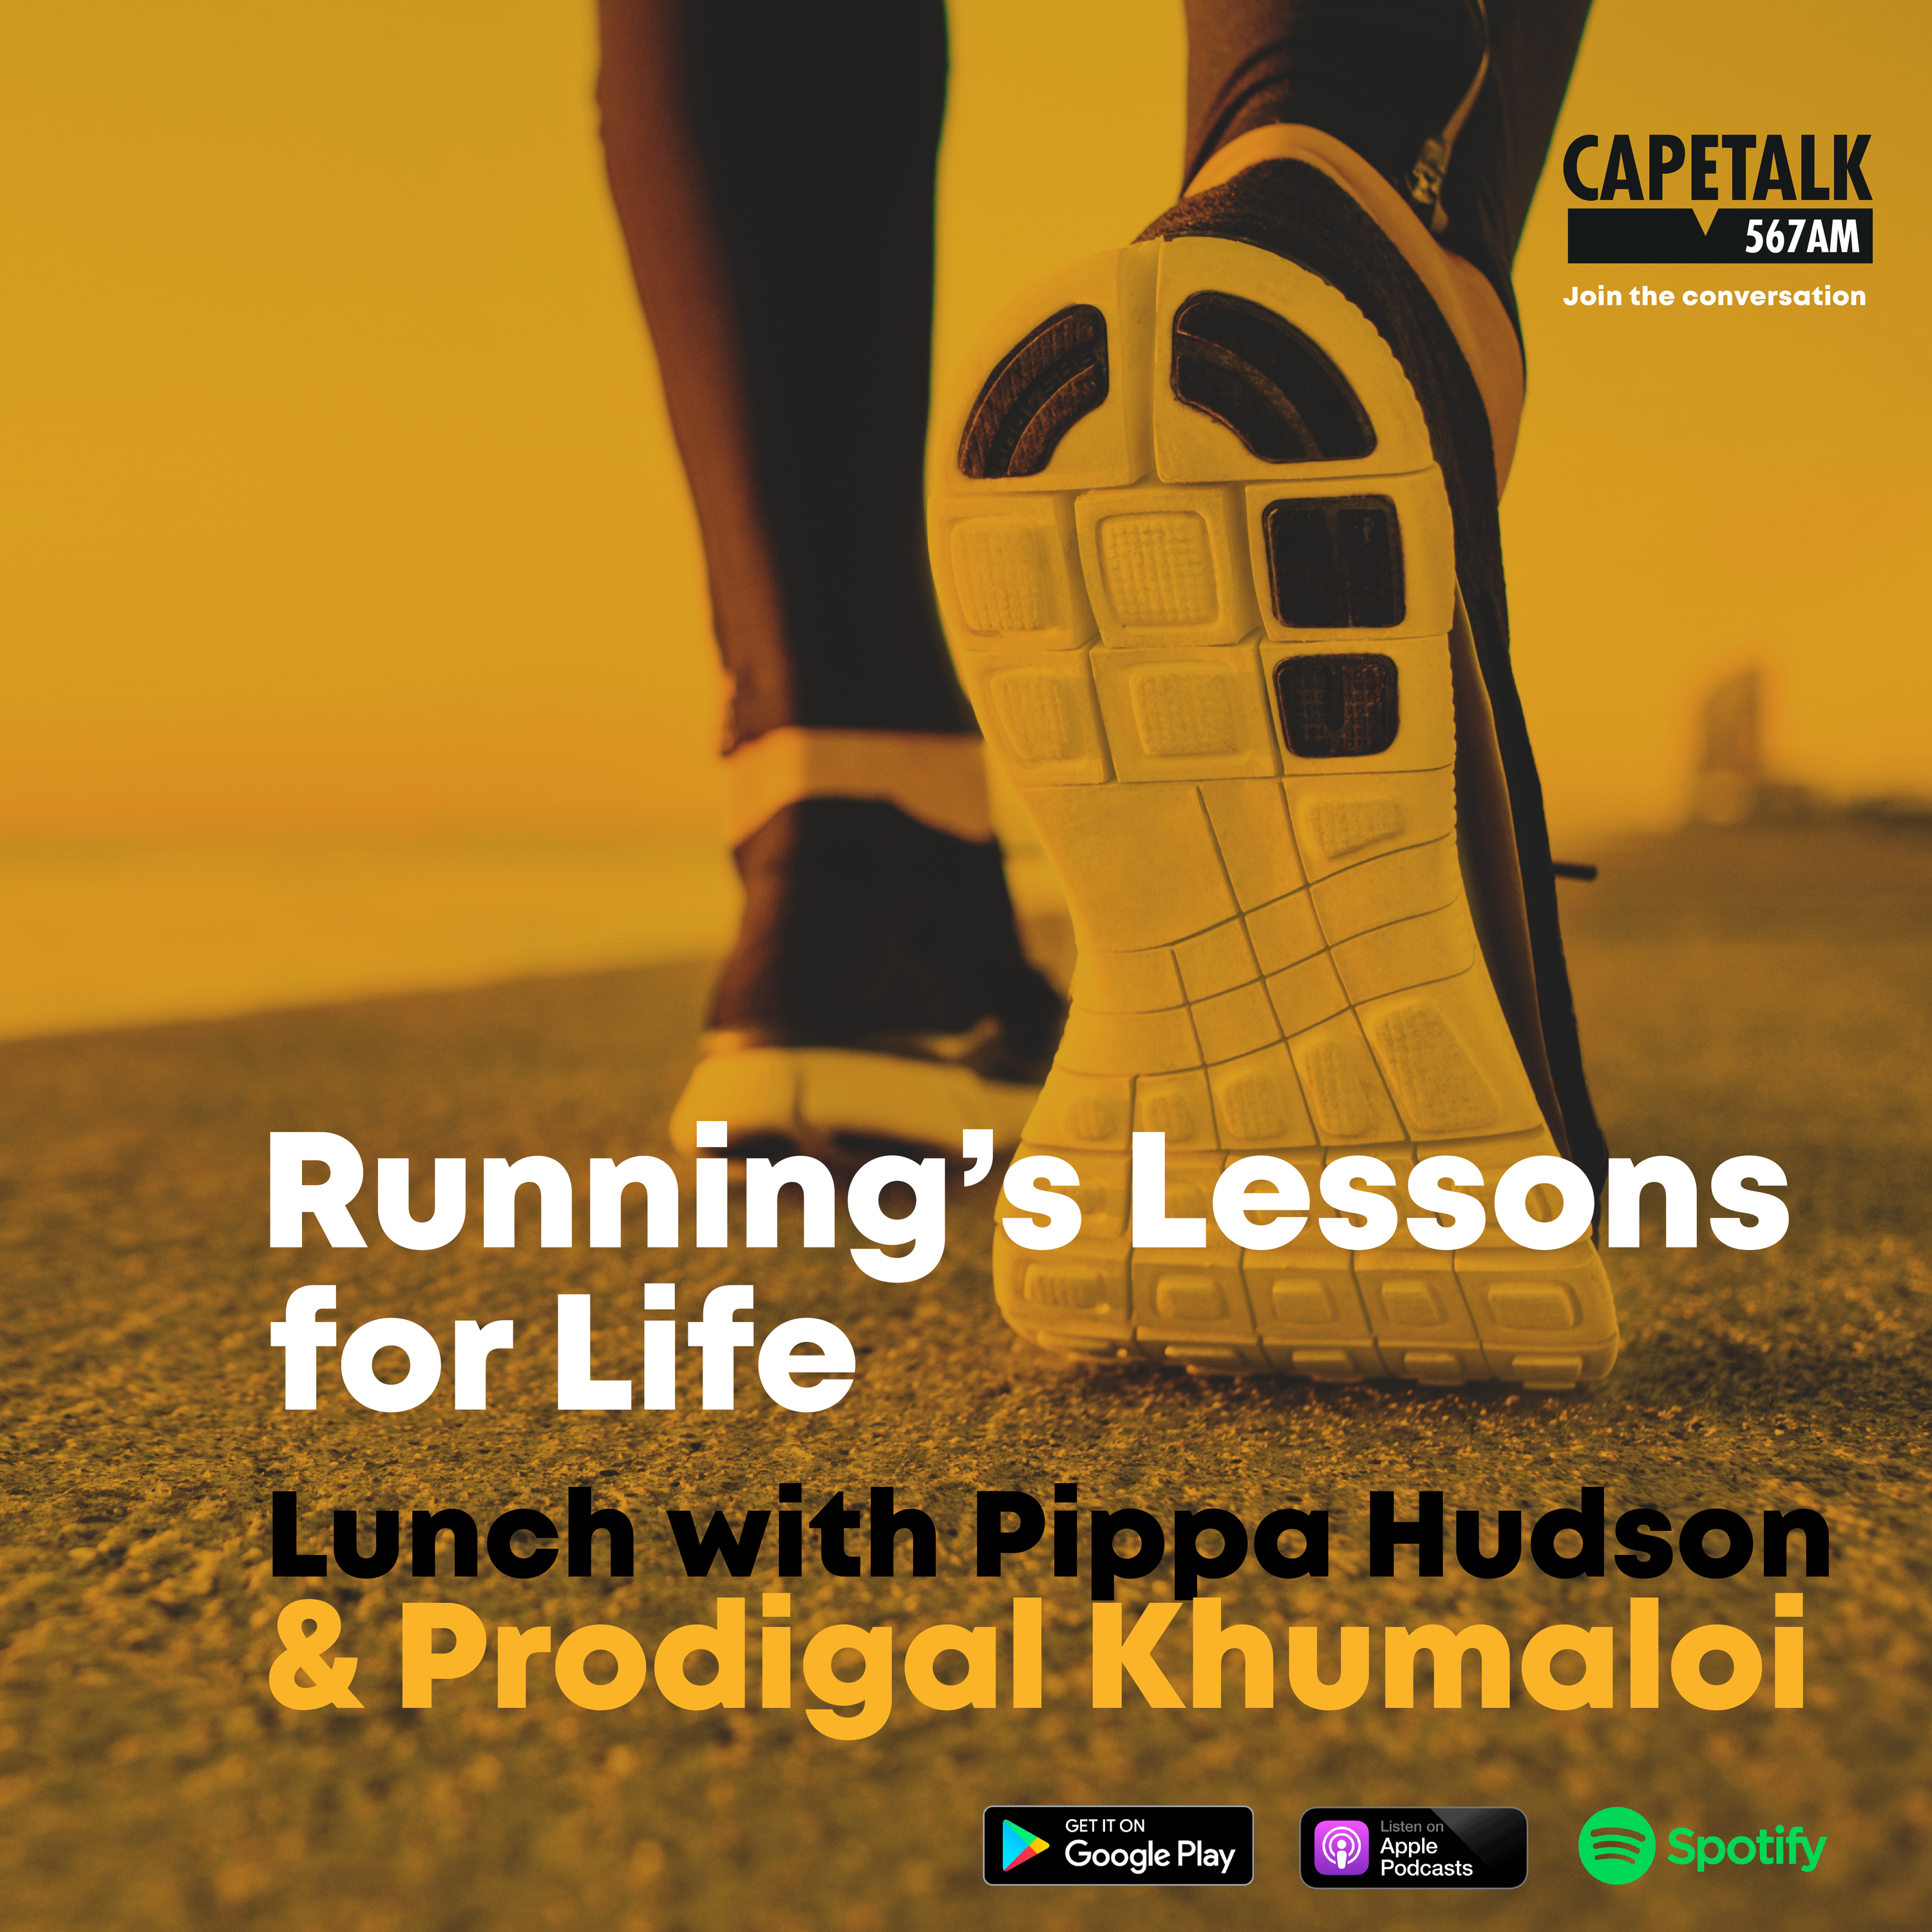 EPISODE 4: Runnings Lessons for Life: Prodigal Khumalo